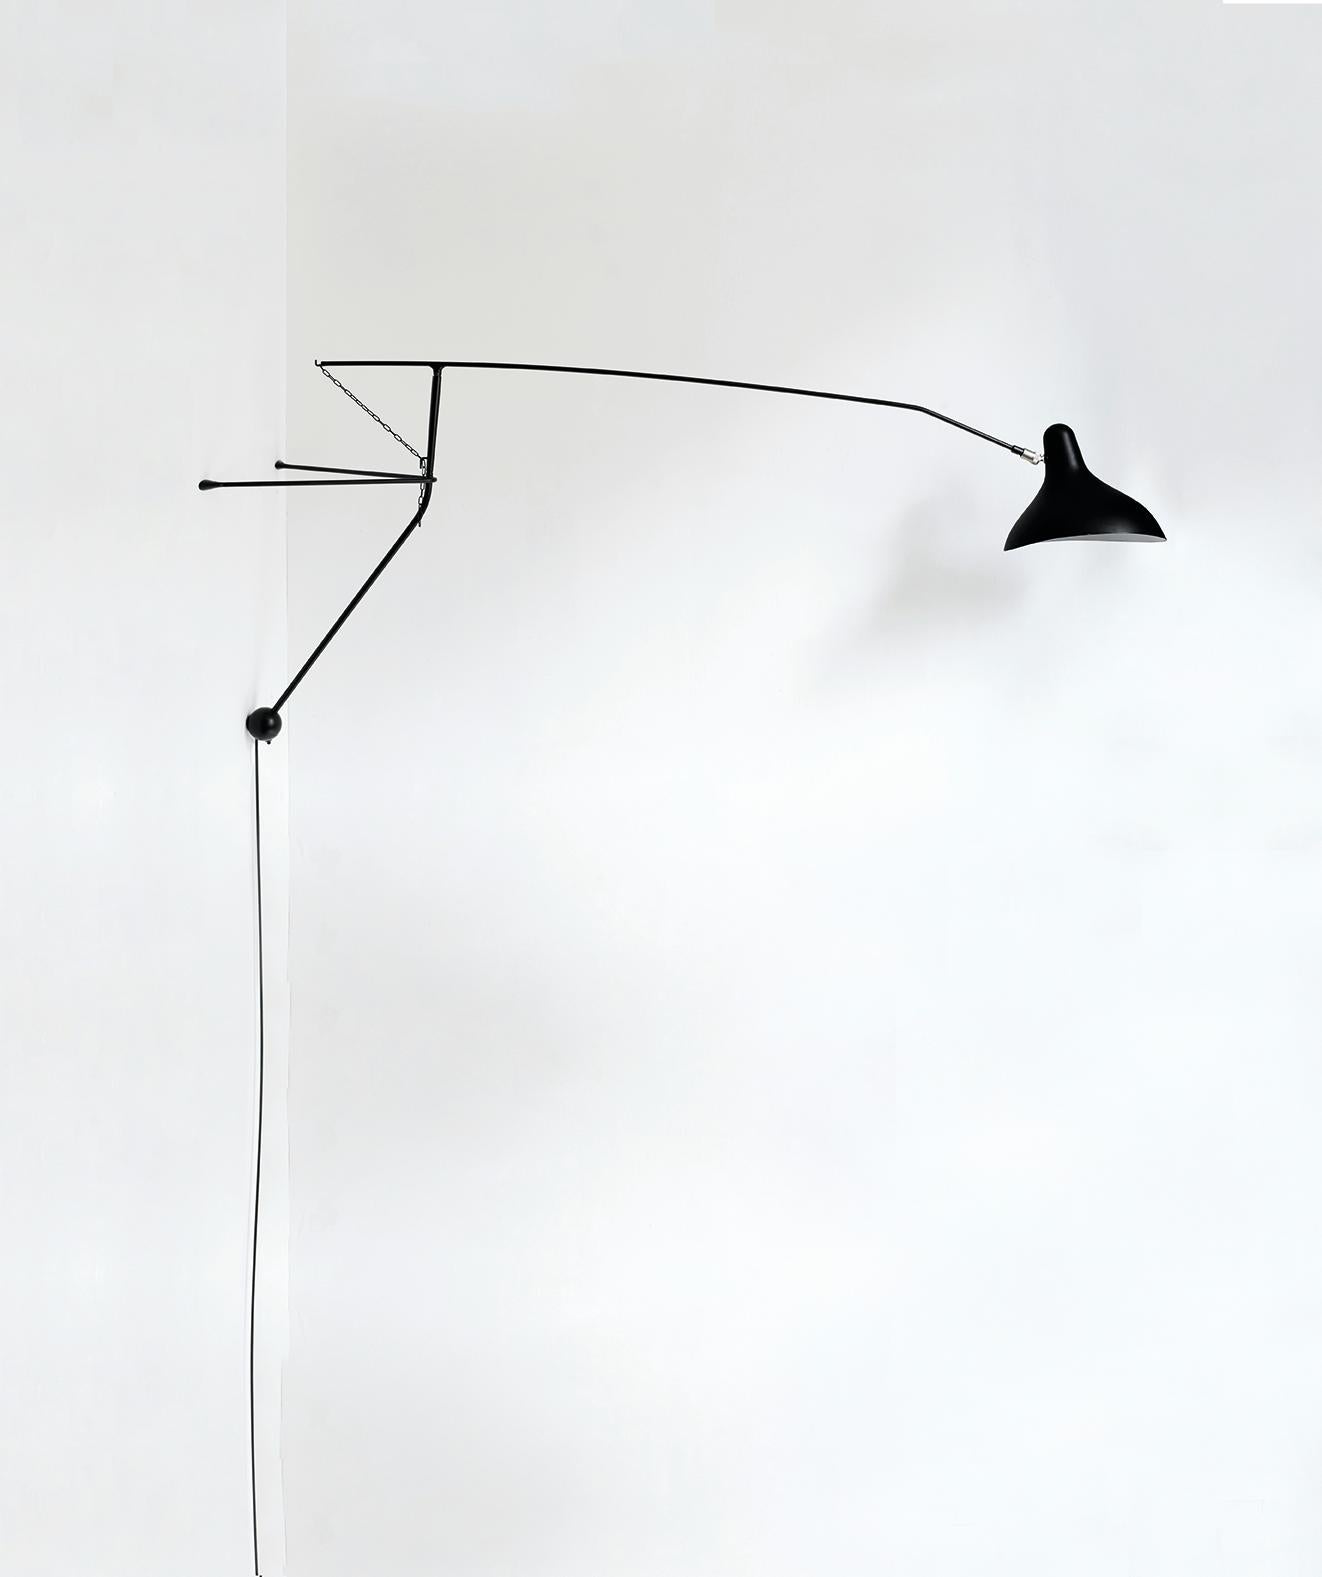 Mantis BS2 wall lamp by Bernard Schottlander
Dimensions: D 153 x W 47 x H 45 cm
Materials: Steel, Aluminium

All our lamps can be wired according to each country. If sold to the USA it will be wired for the USA for instance.

Wall lamp in